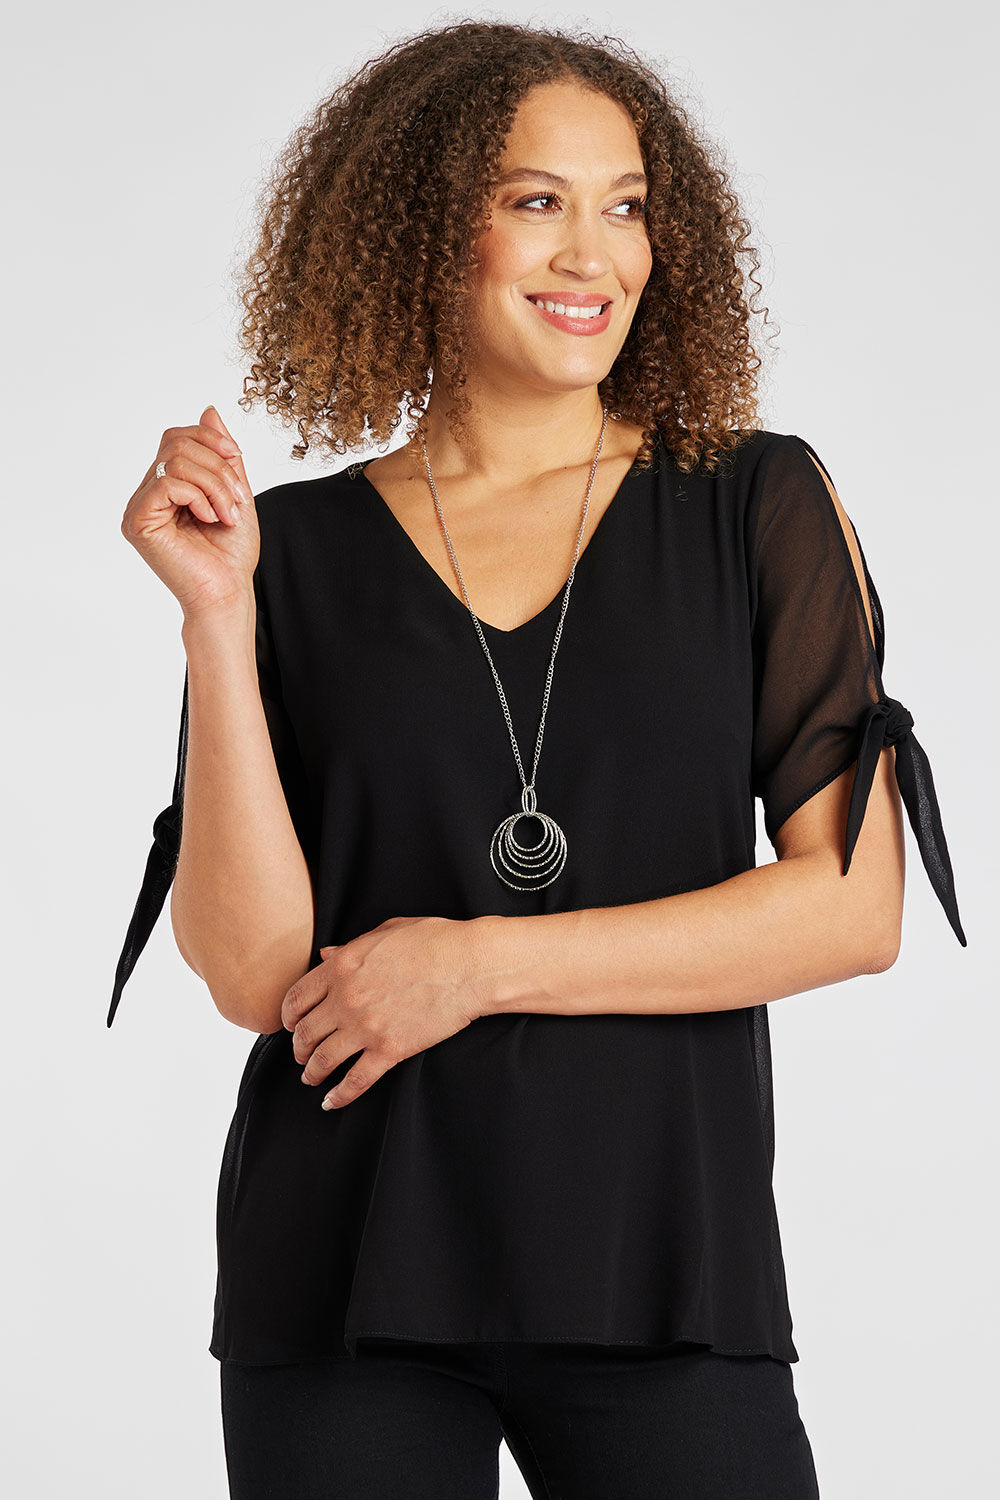 Bonmarche Black Short Sleeve Double Layer Chiffon Top With Necklace, Size: 10